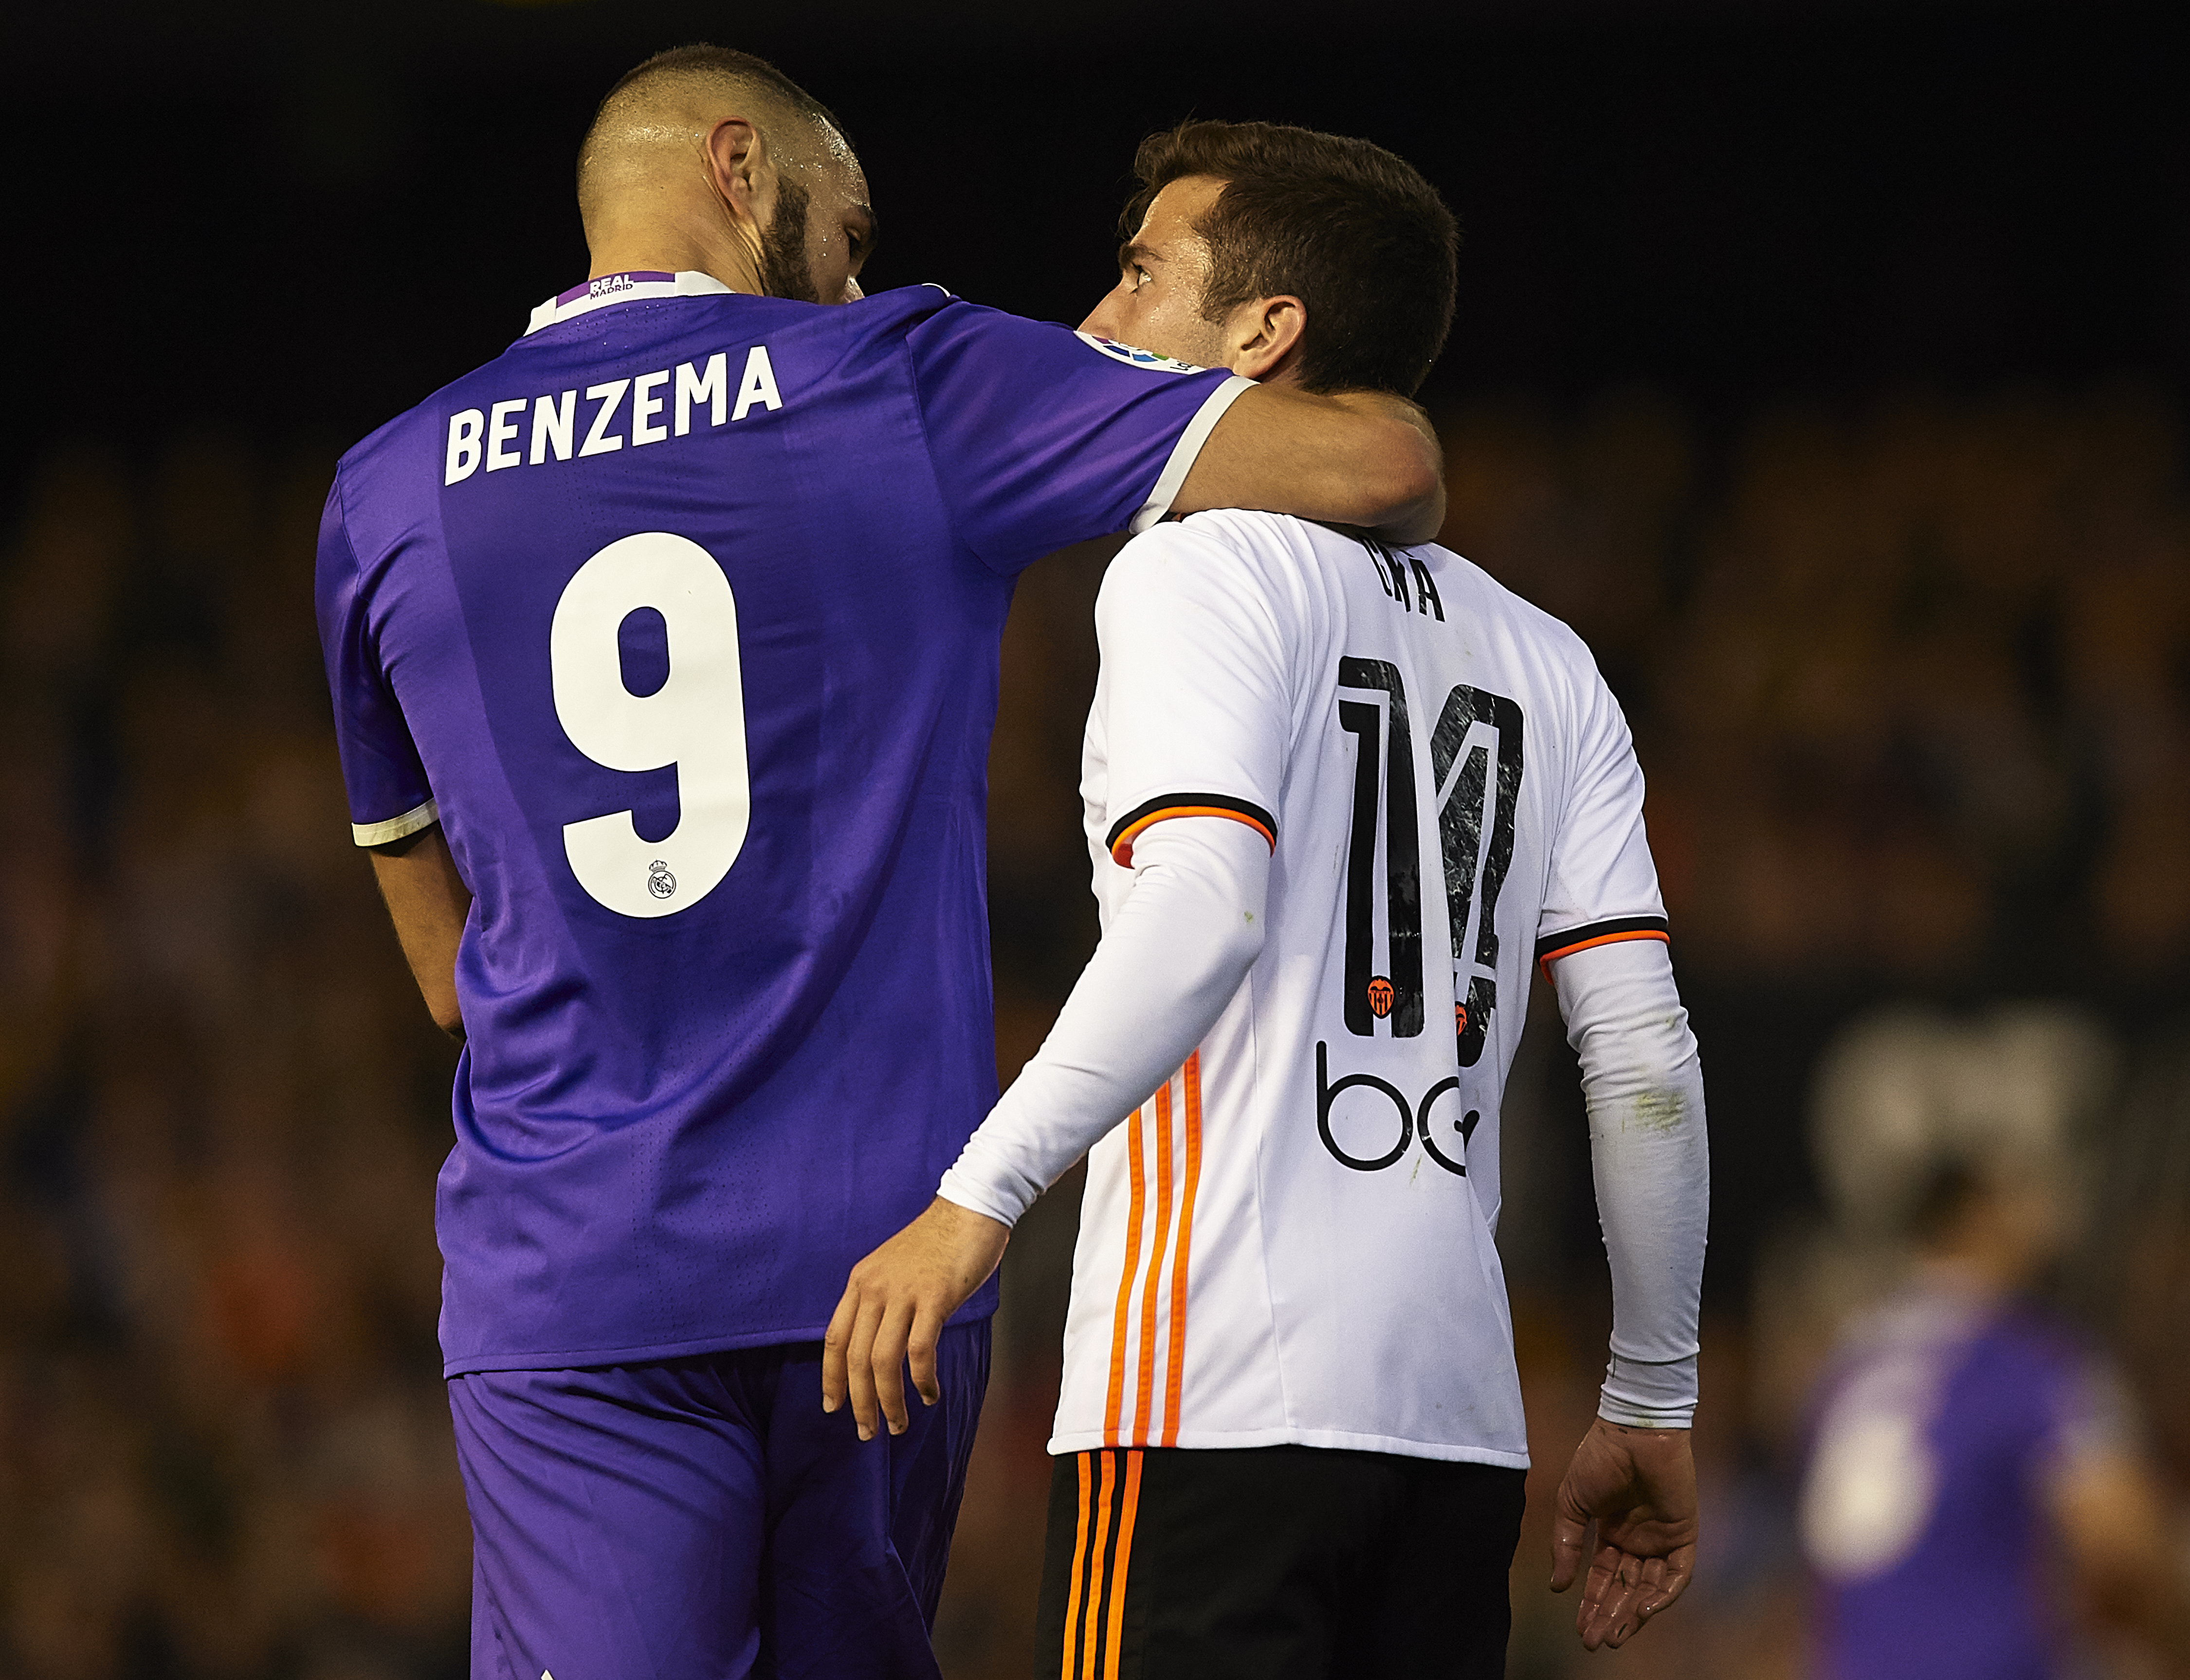 VALENCIA, SPAIN - FEBRUARY 22:  Jose Luis Gaya of Valencia argues with  Karim Benzema of Real Madrid during the La Liga match between Valencia CF and Real Madrid at Mestalla Stadium on February 22, 2017 in Valencia, Spain.  (Photo by Manuel Queimadelos Alonso/Getty Images)